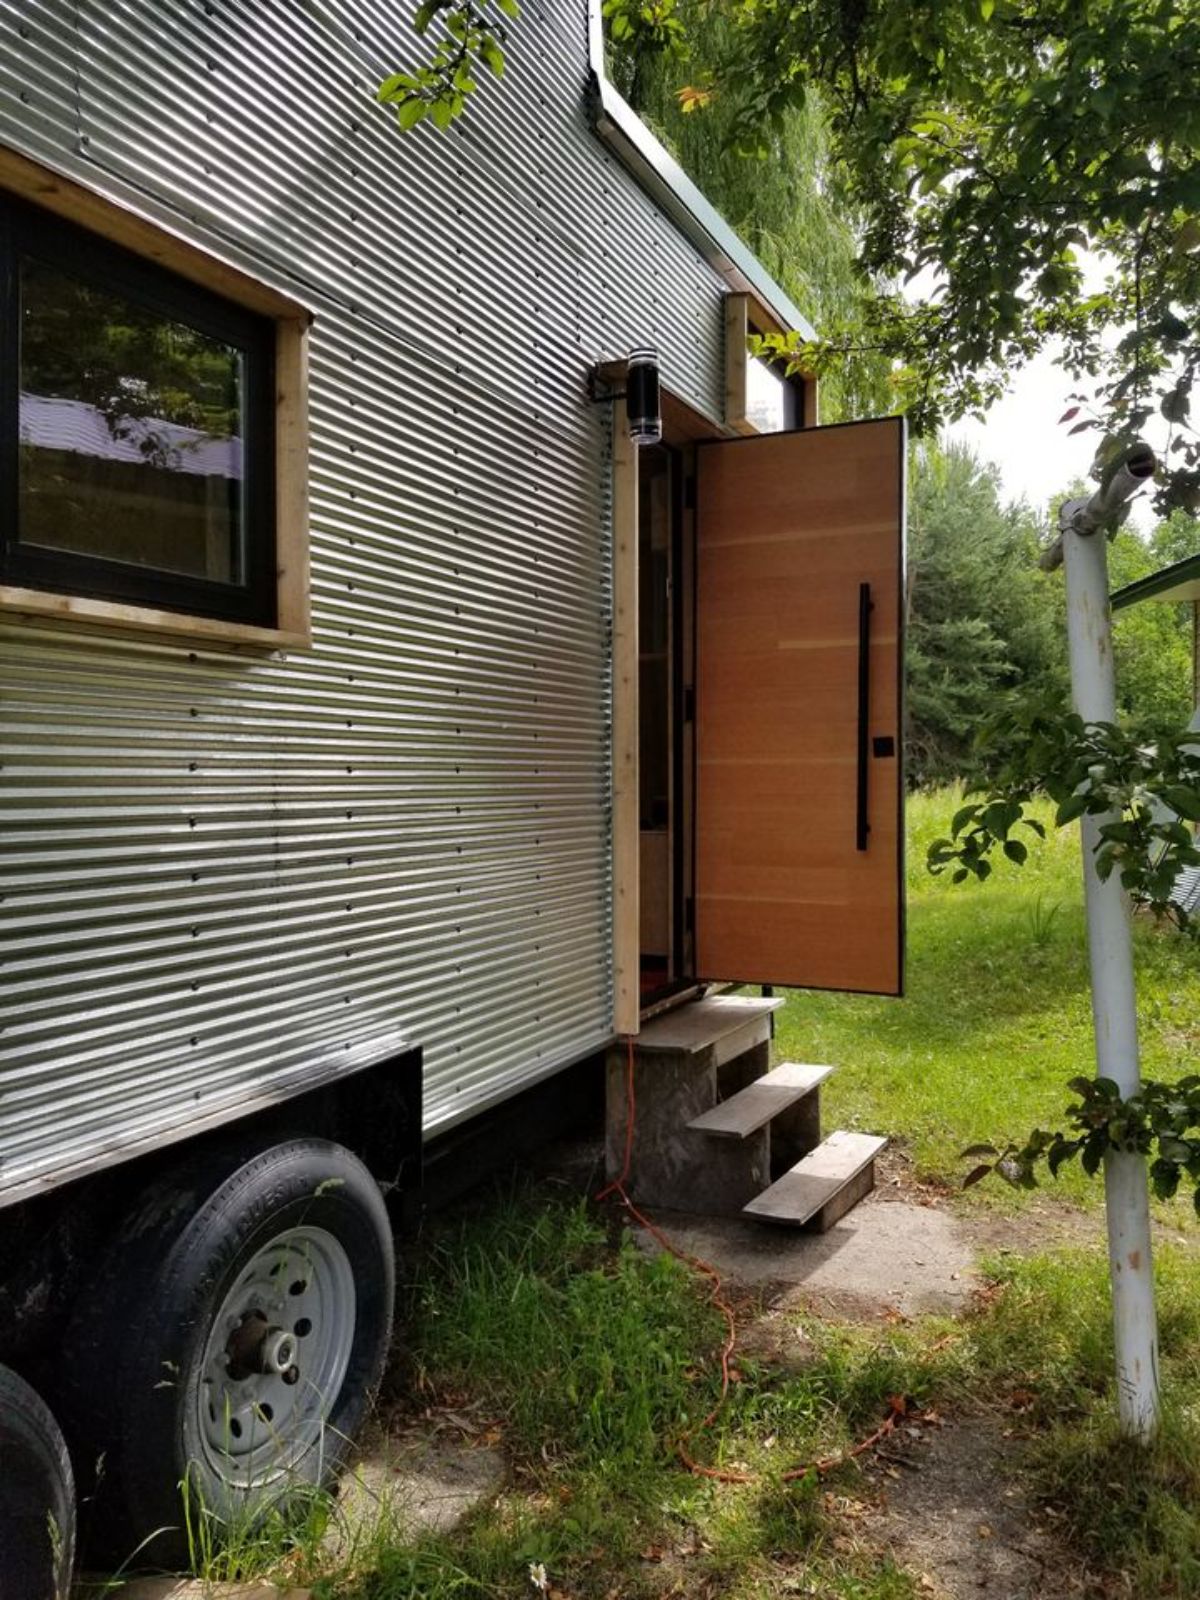 Main entrance view of Tiny Trailer Home